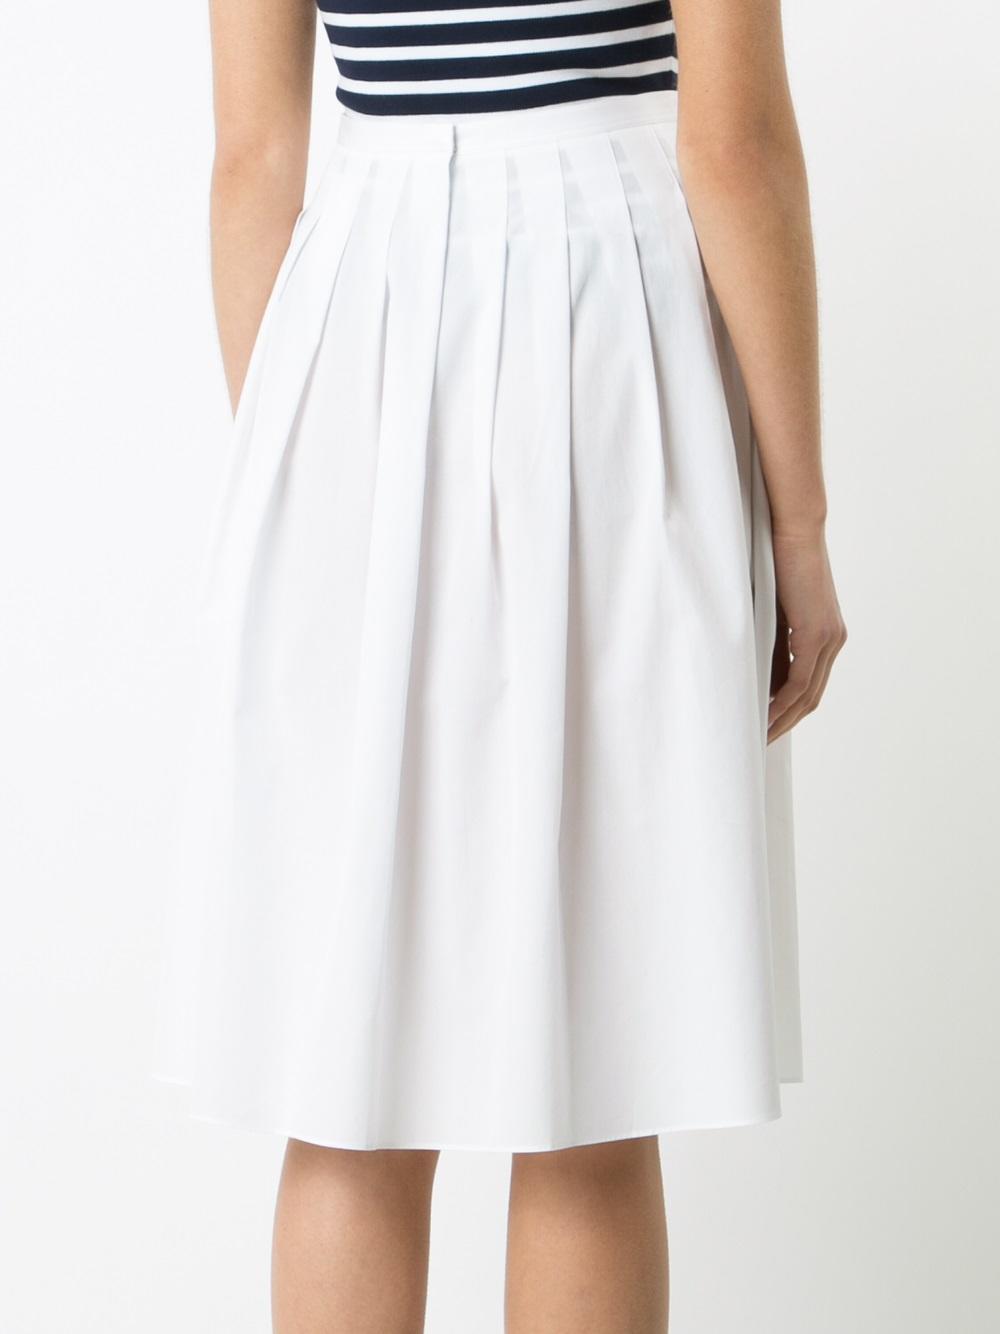 Lyst - Vince Pleated Skirt in White